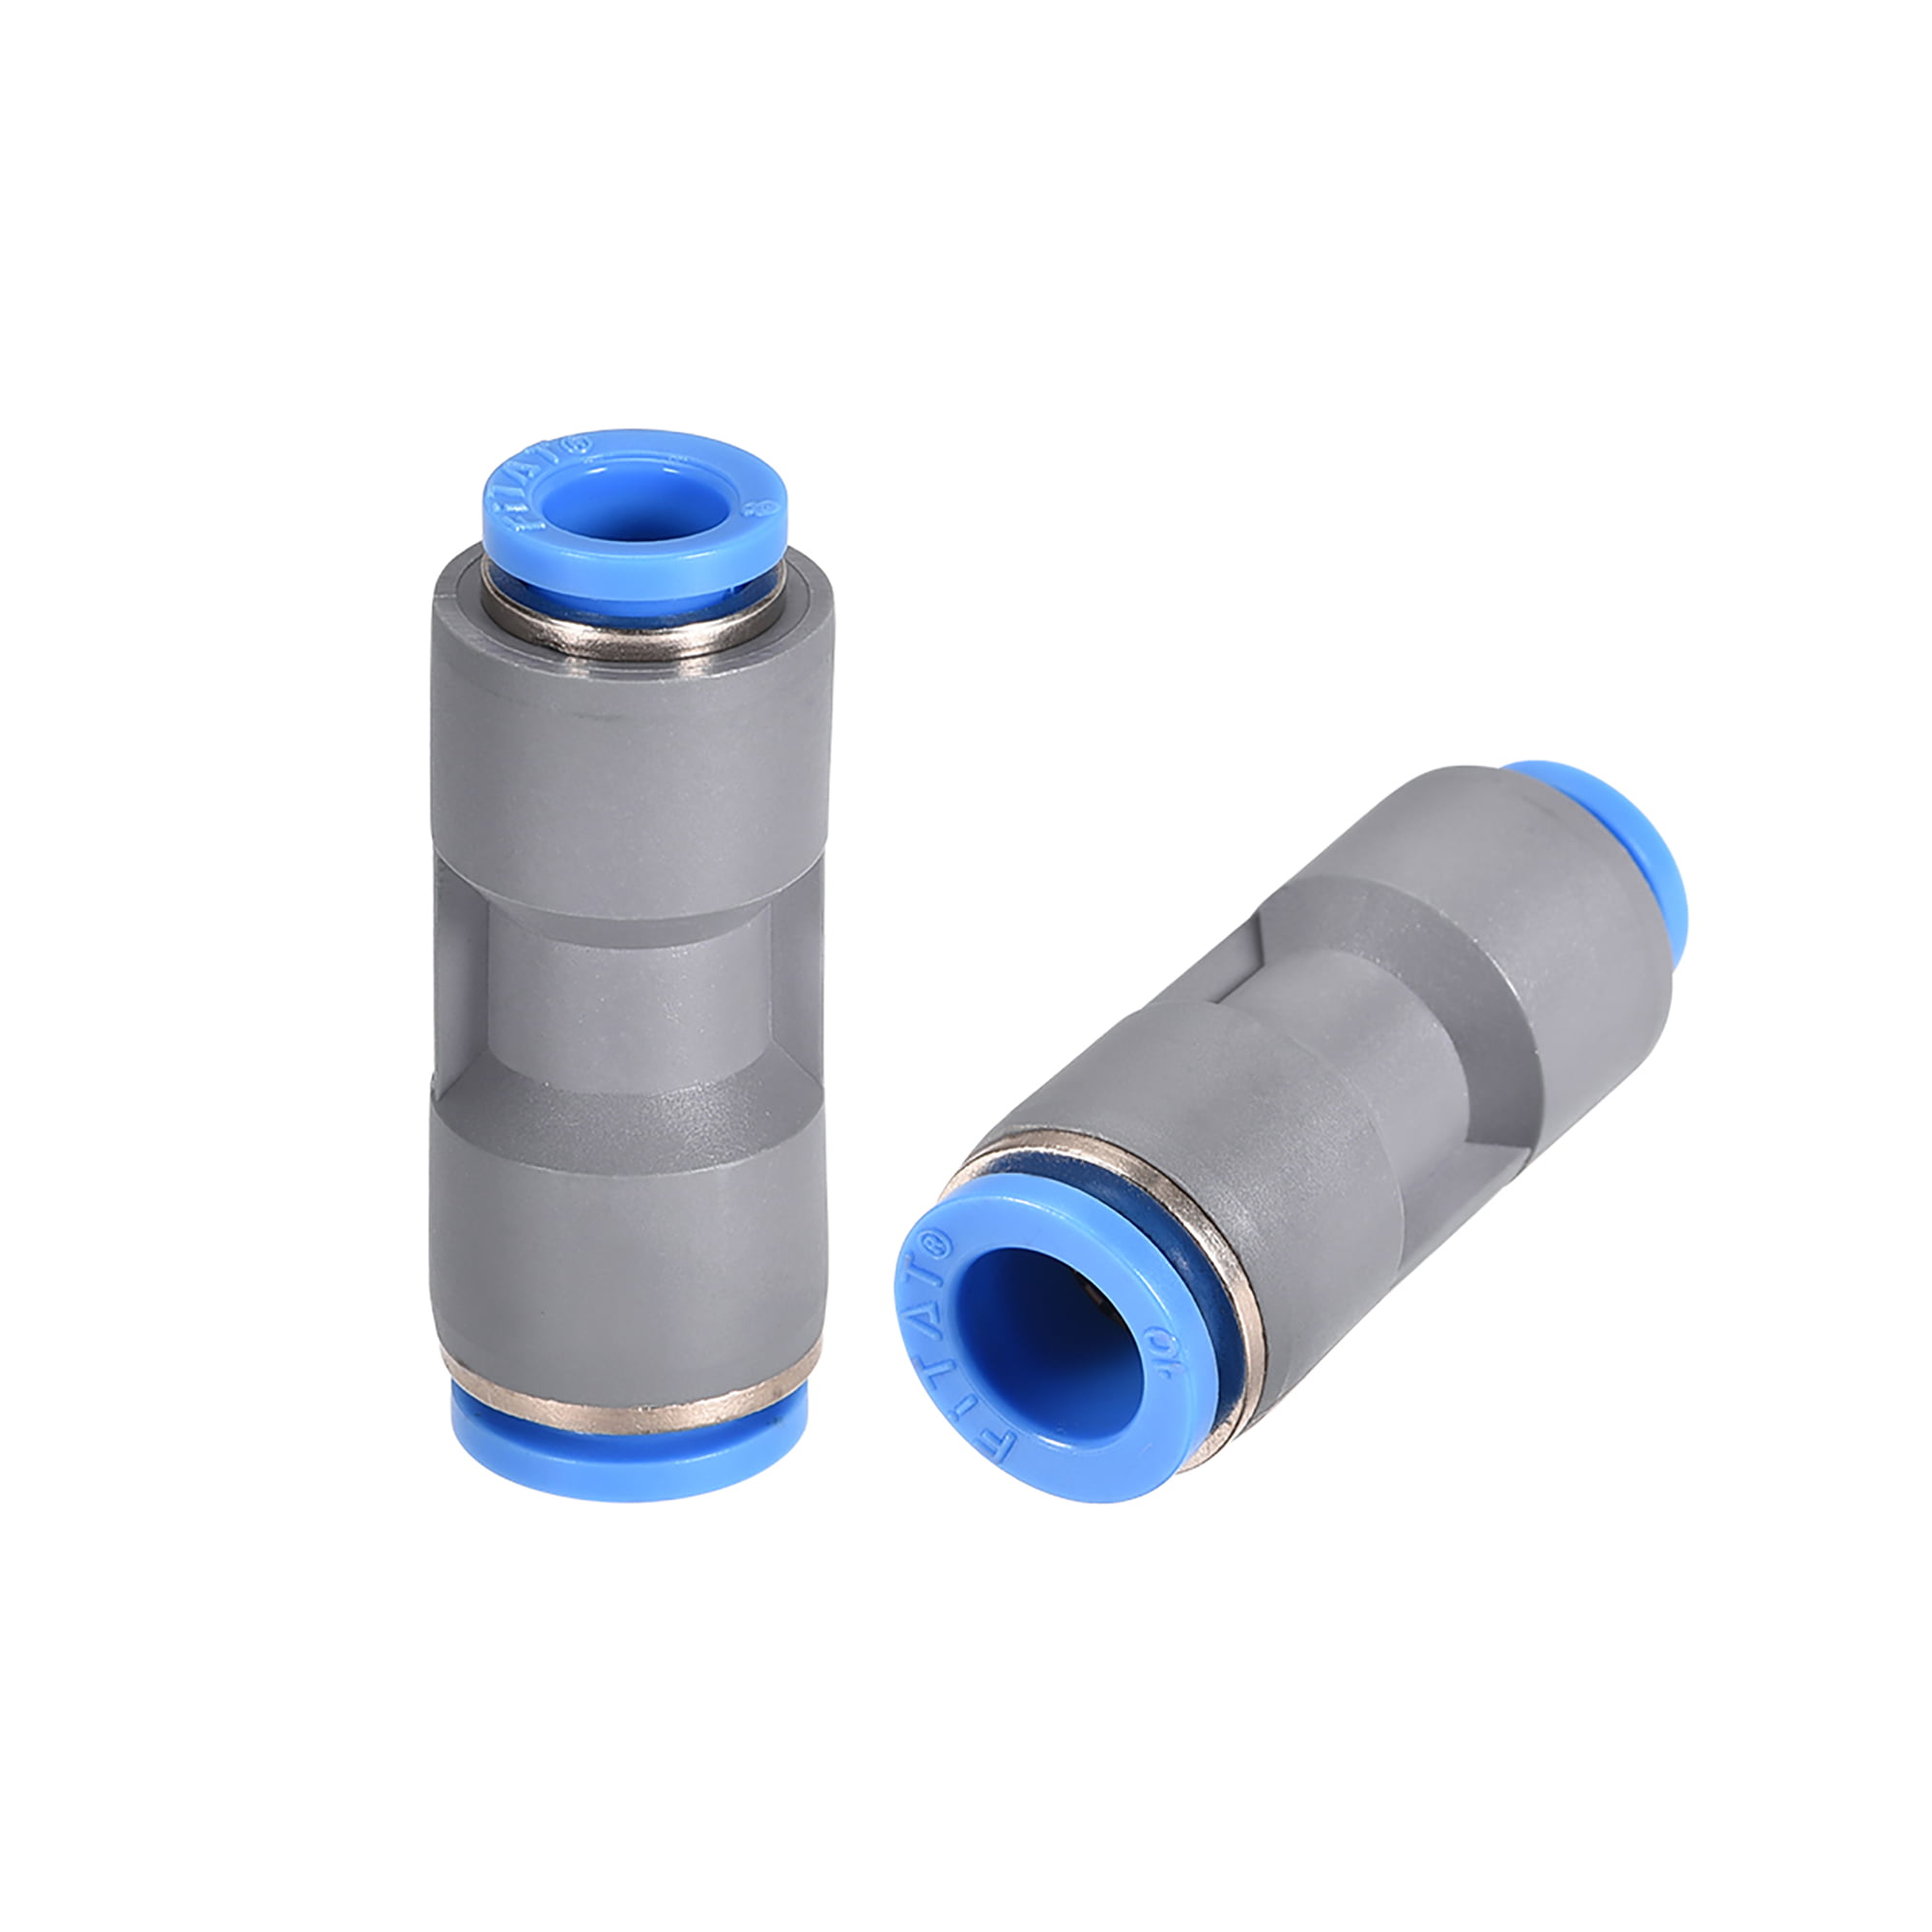 Straight Push Connectors 10mm to 8mm Quick Release Pneumatic Connector Quick Release Button Connectors Telescoping Tubing